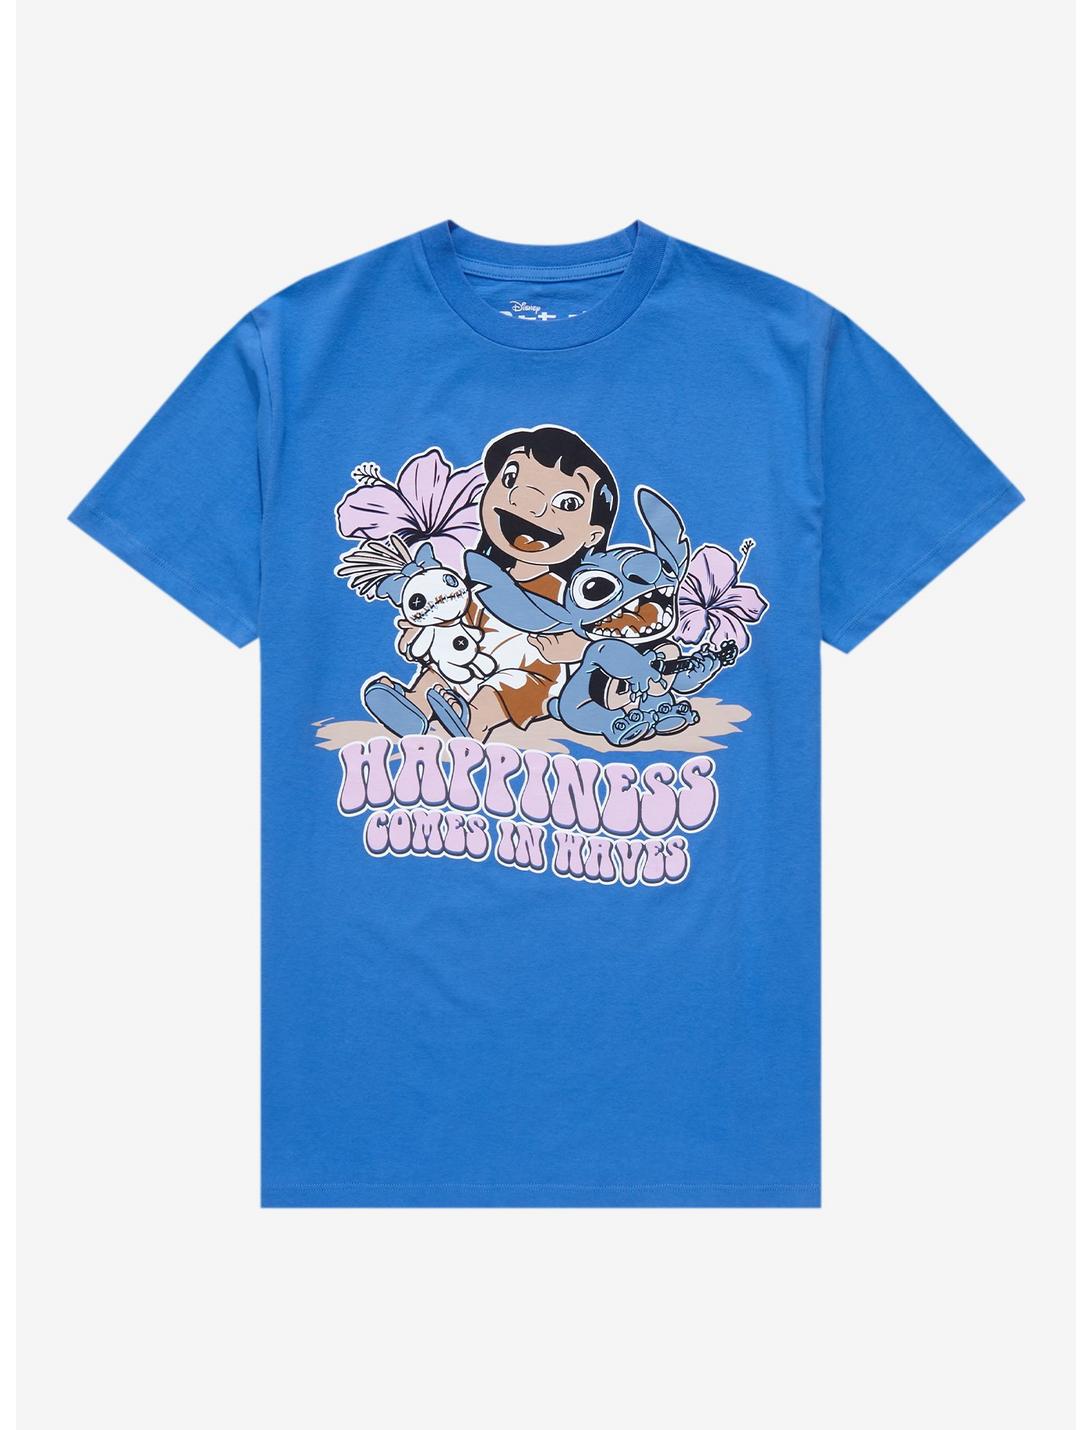 Disney Lilo & Stitch Happiness T-Shirt - BoxLunch Exclusive, ROYAL, hi-res